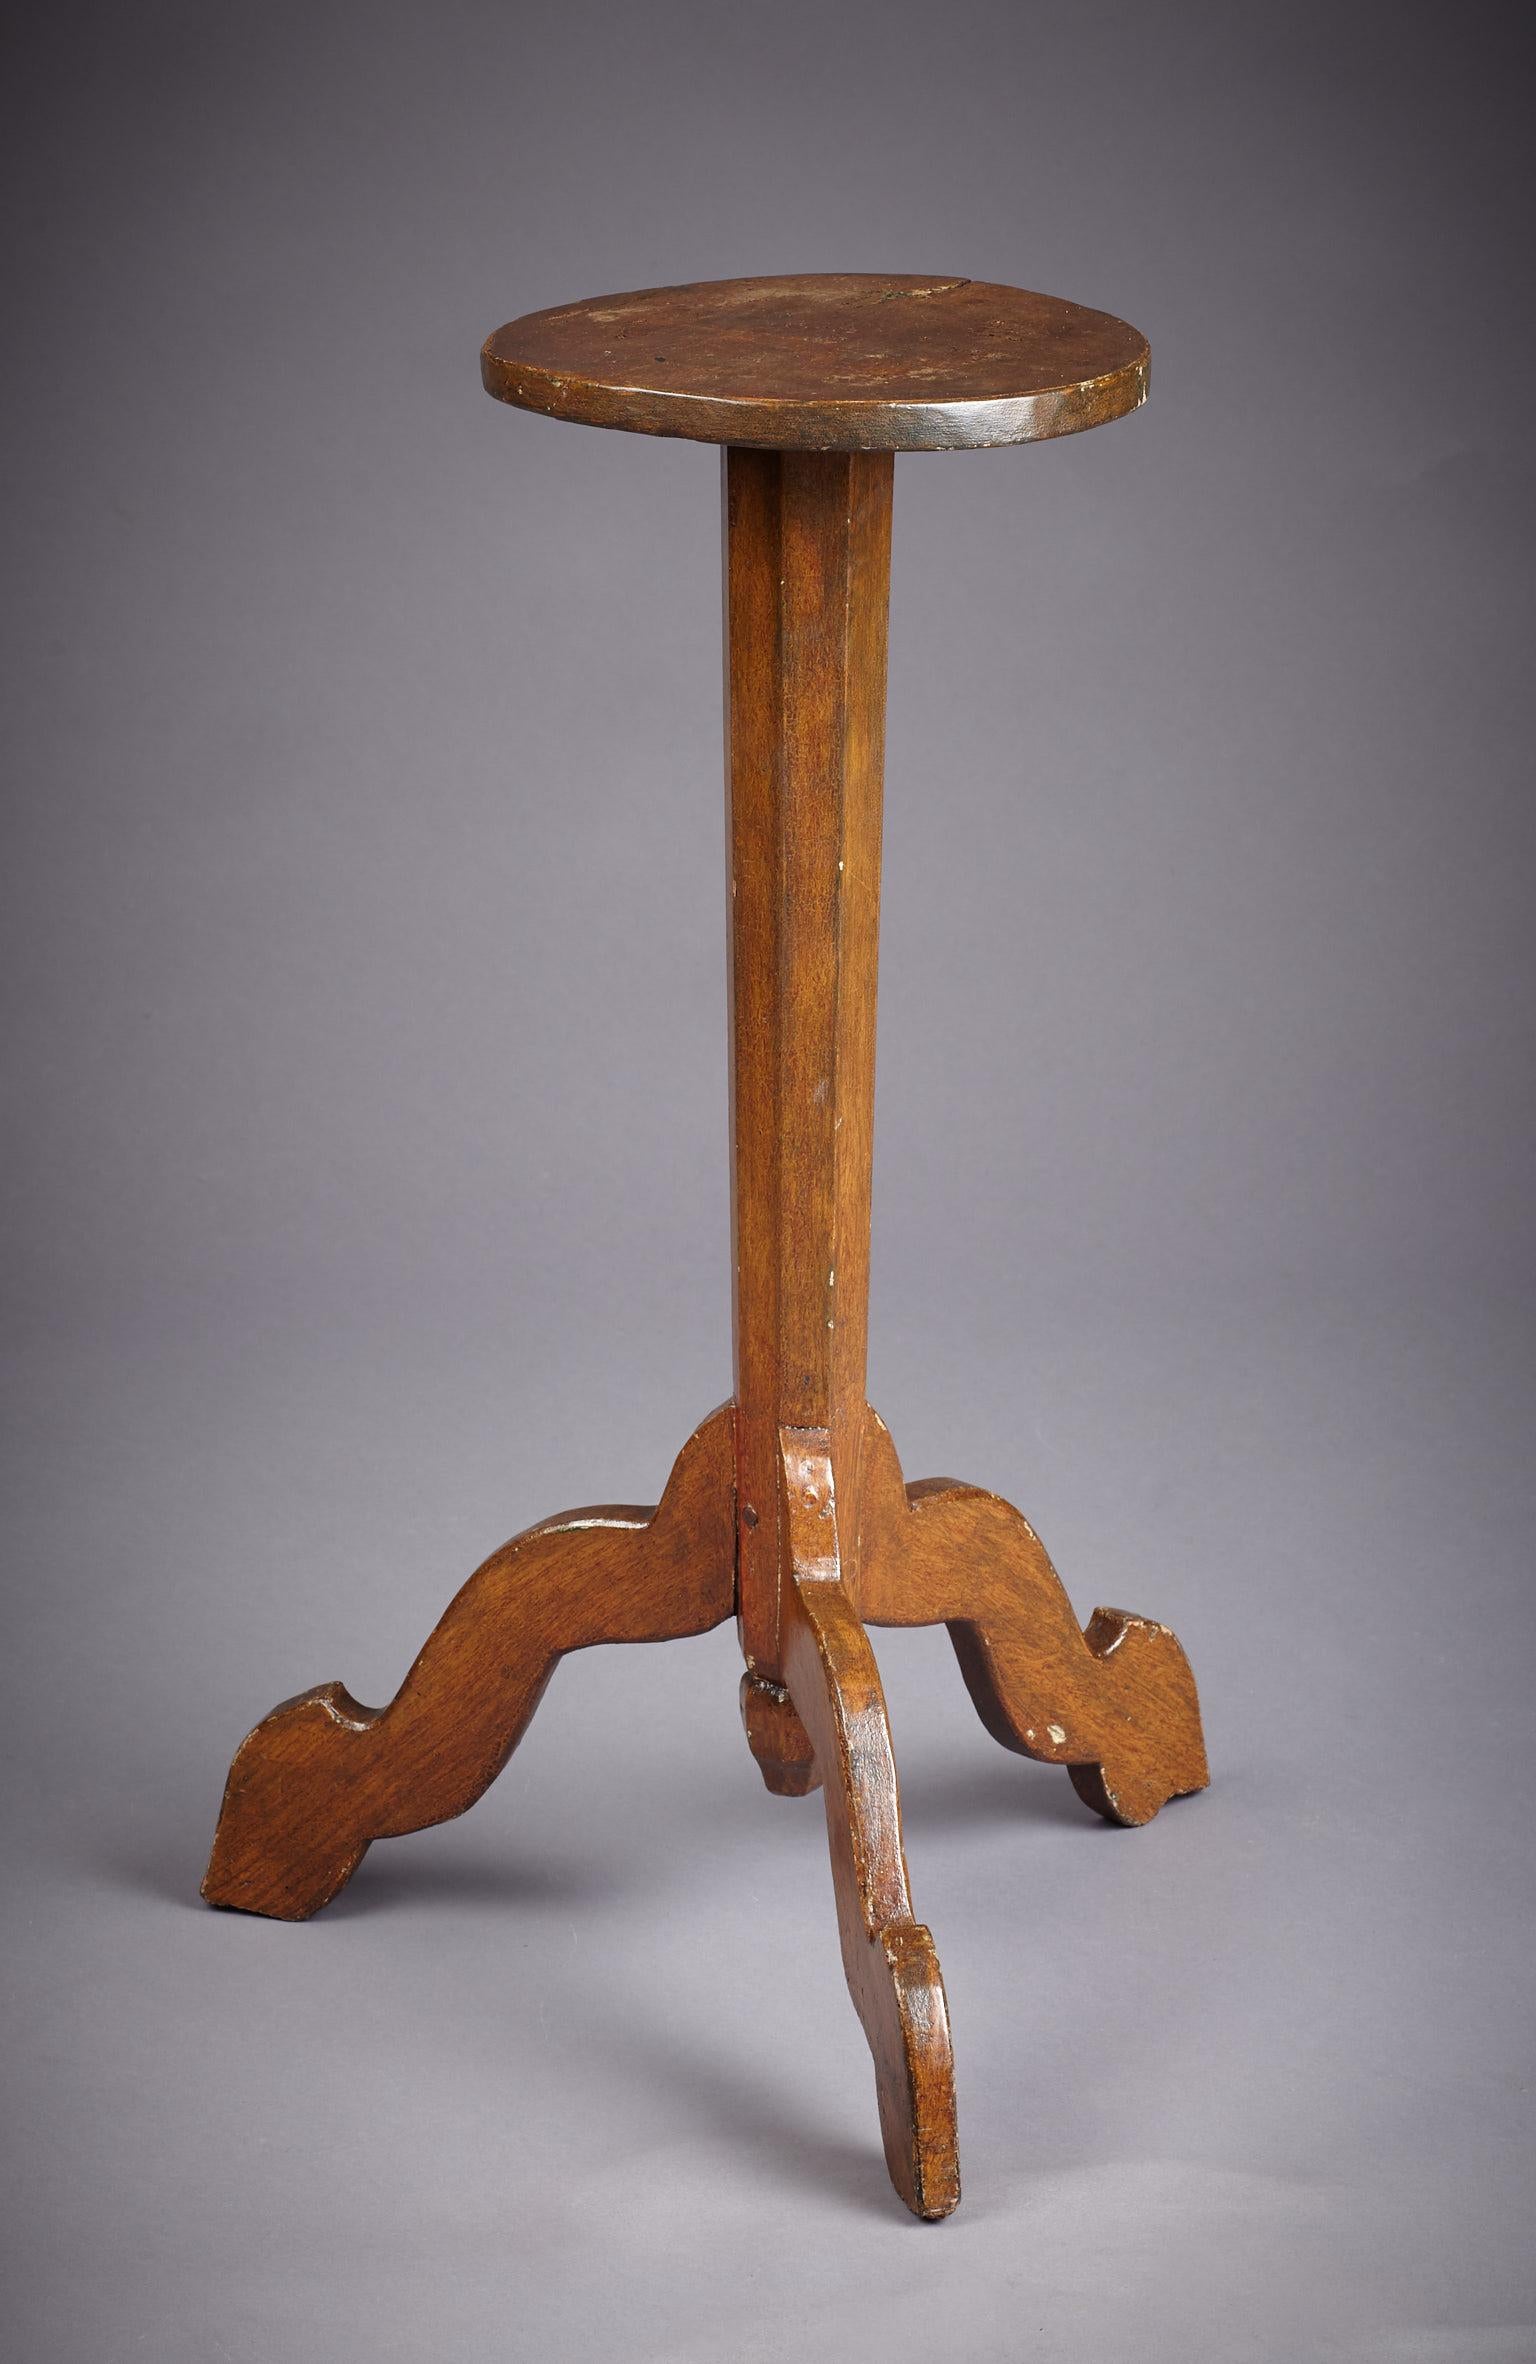 Painted Oak Candle-Stand, Early 18th Century, Queen Anne, England, circa 1710 im Angebot 1